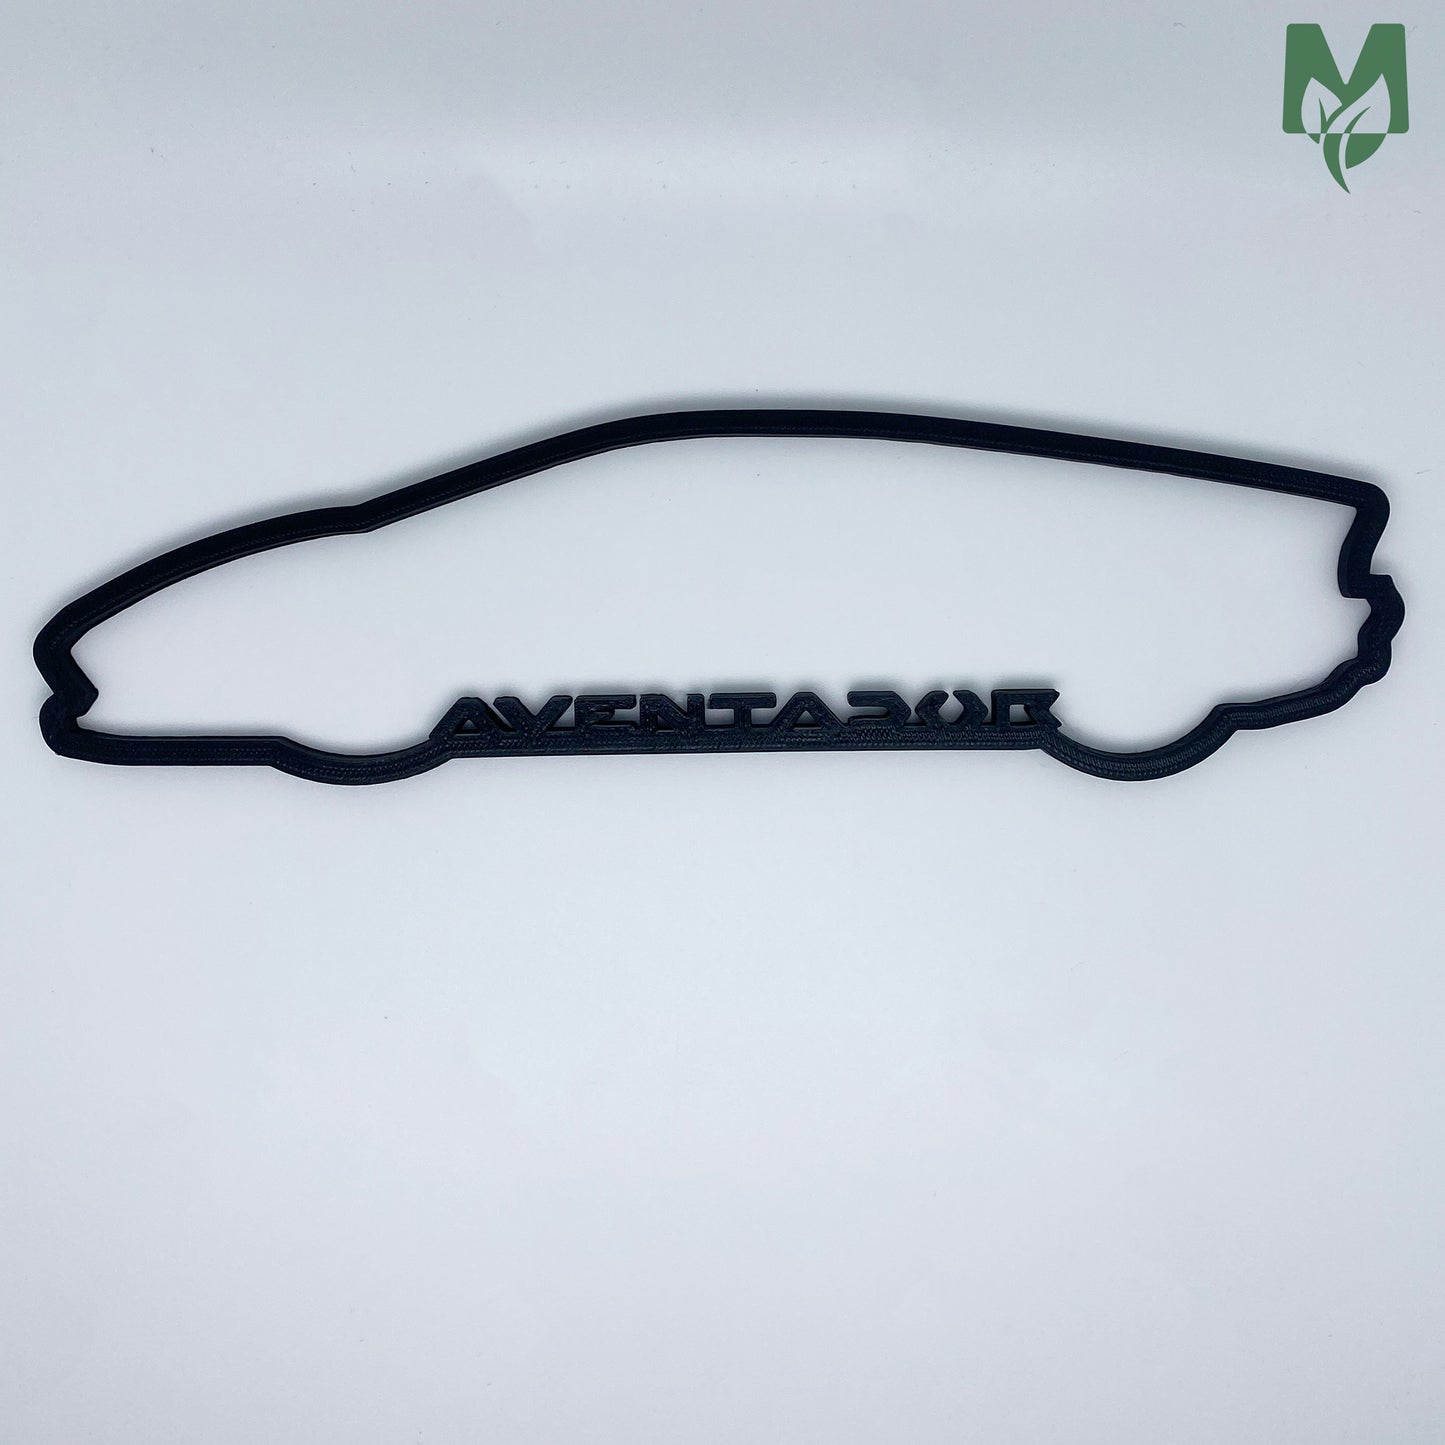 Car Layout Wall Art - Made From Recycled Discarded Plastics!